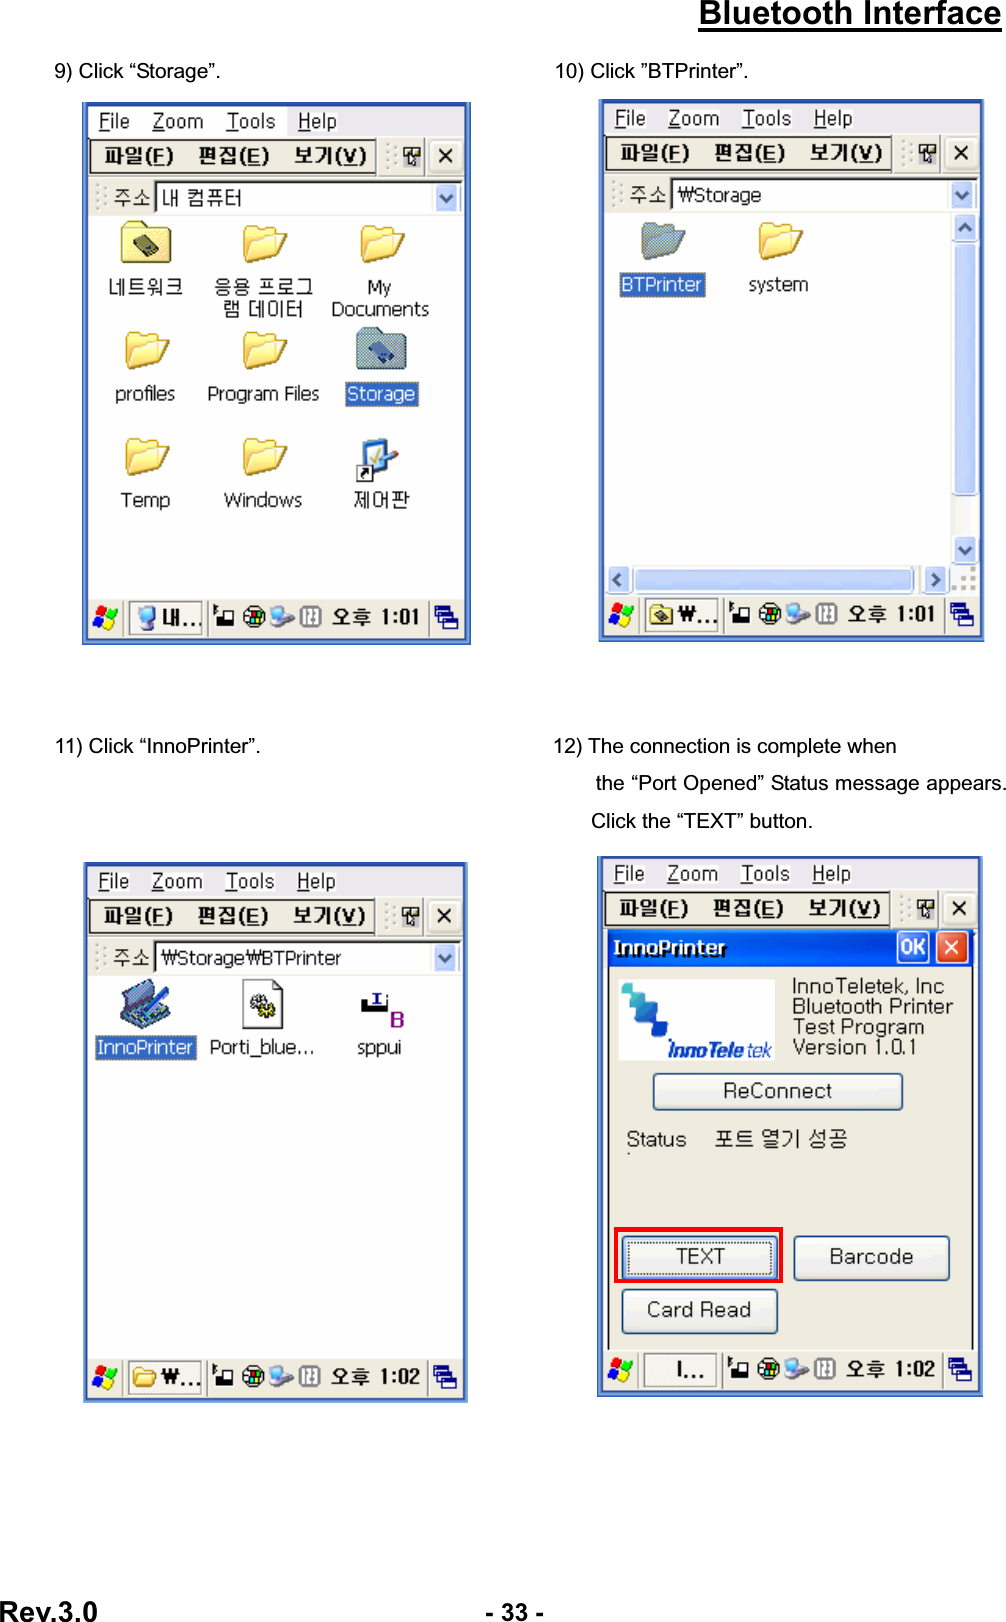 Bluetooth InterfaceRev.3.0  - 33 -9) Click “Storage”.                                10) Click ”BTPrinter”. 11) Click “InnoPrinter”.                            12) The connection is complete when  the “Port Opened” Status message appears. Click the “TEXT” button. 